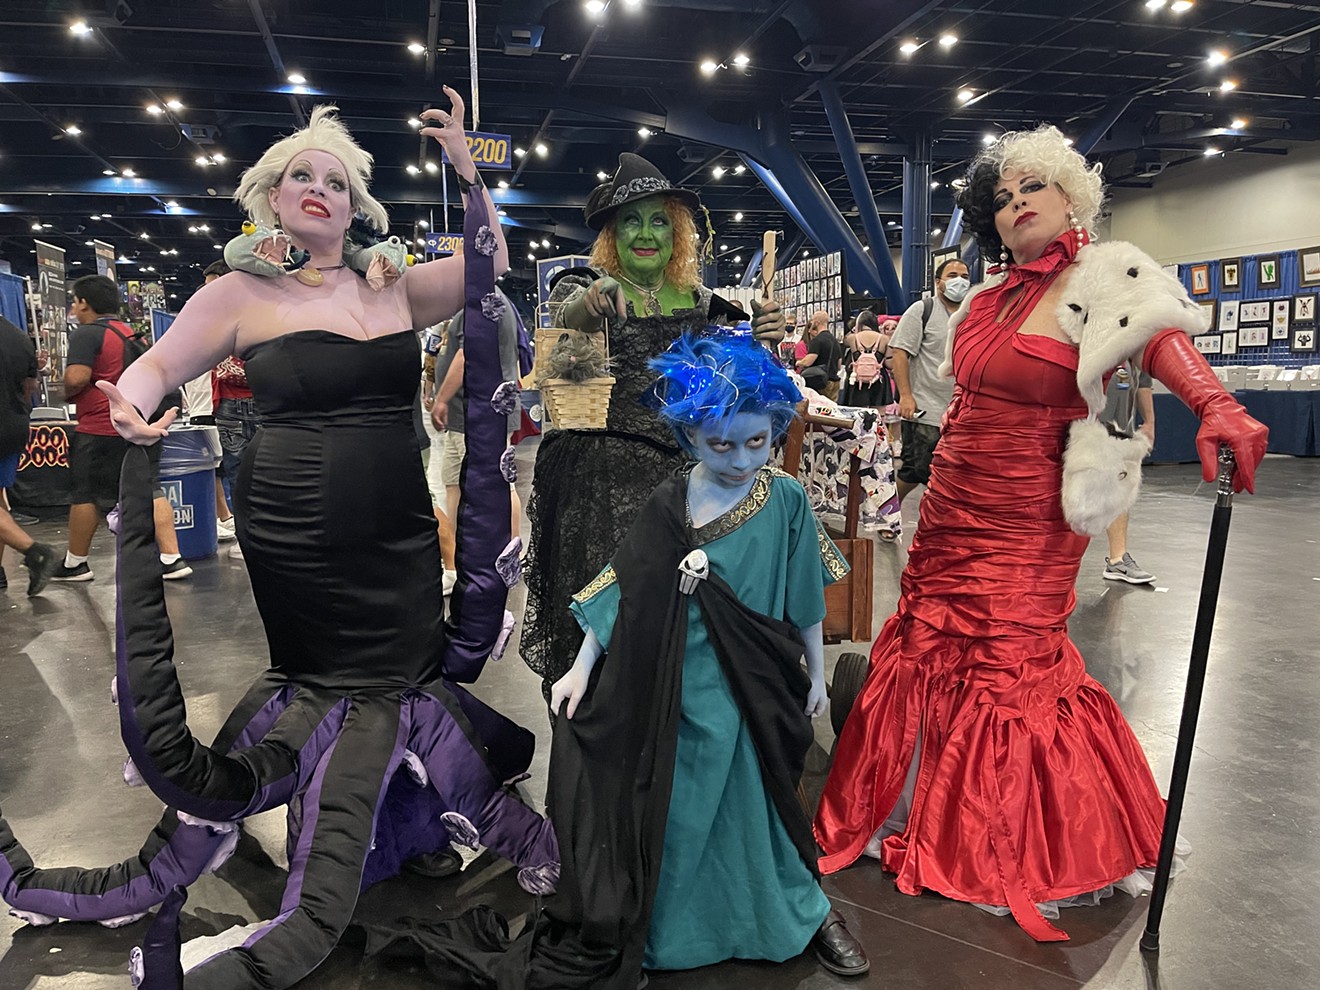 Fans cosplayed as various figures from movies, television, and comics.